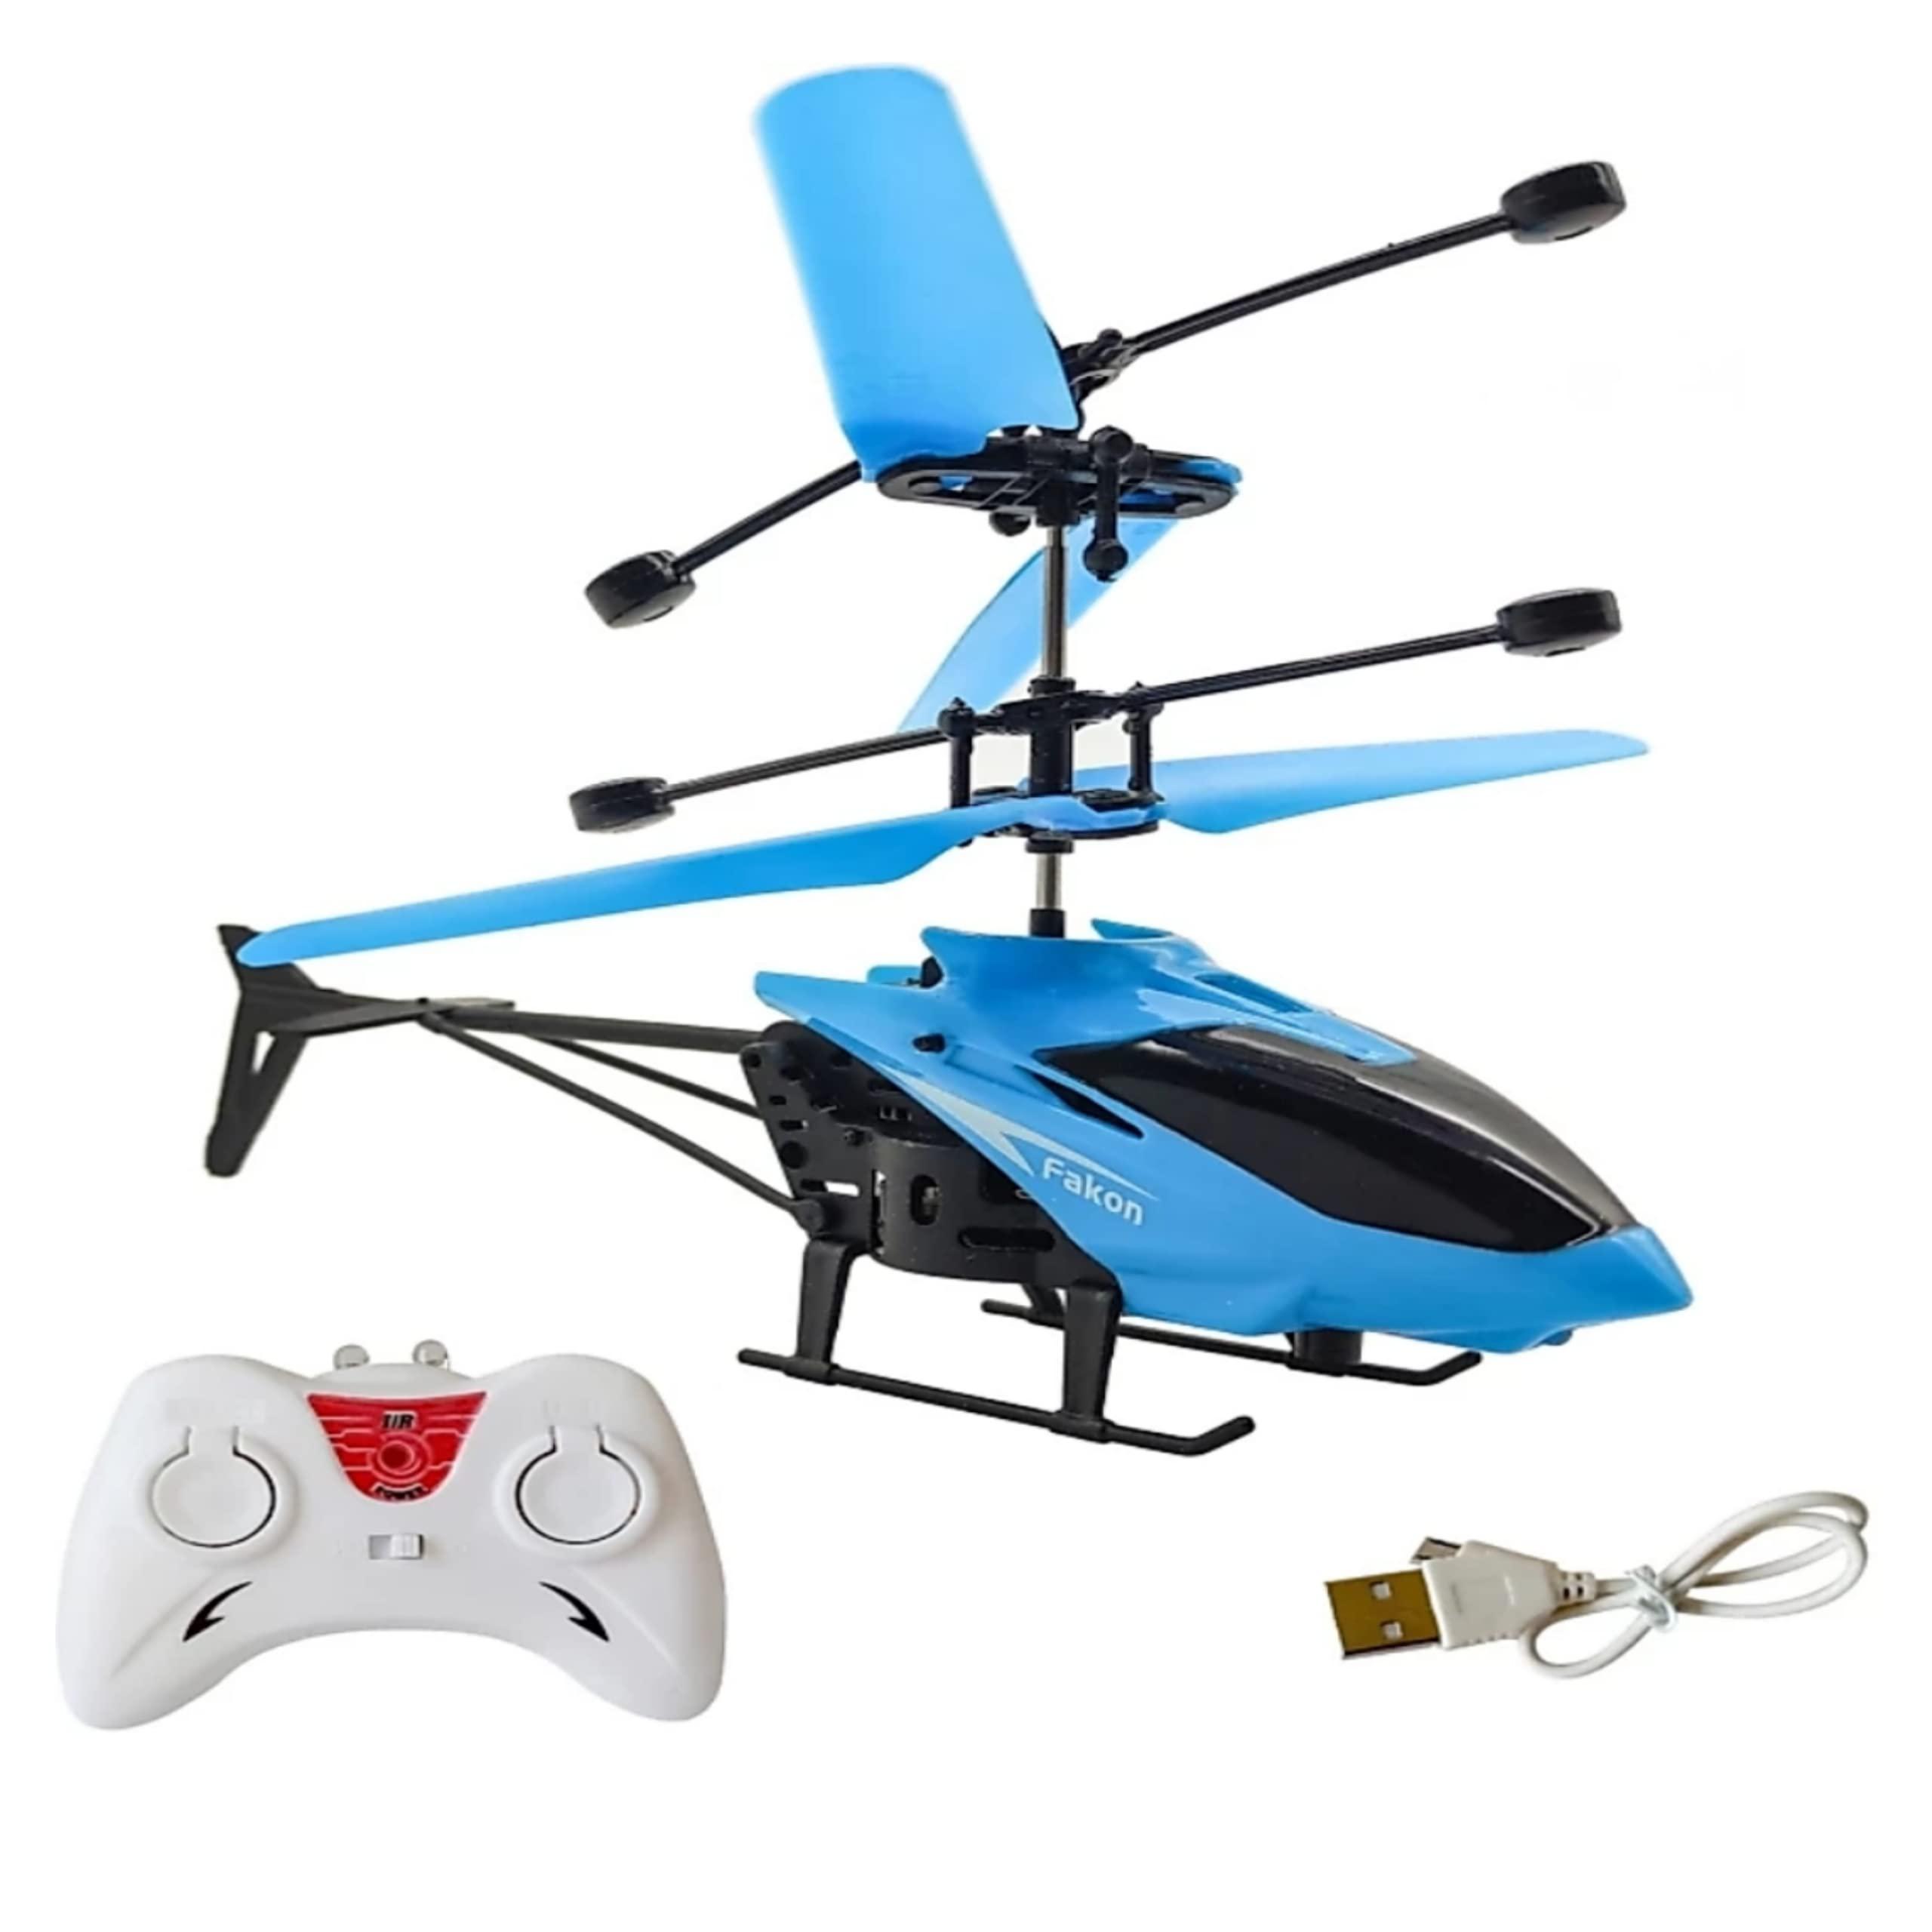 Remote Control Helicopter Charger Price: Choosing the Right Charger for Your Remote Control Helicopter: Considerations and Options